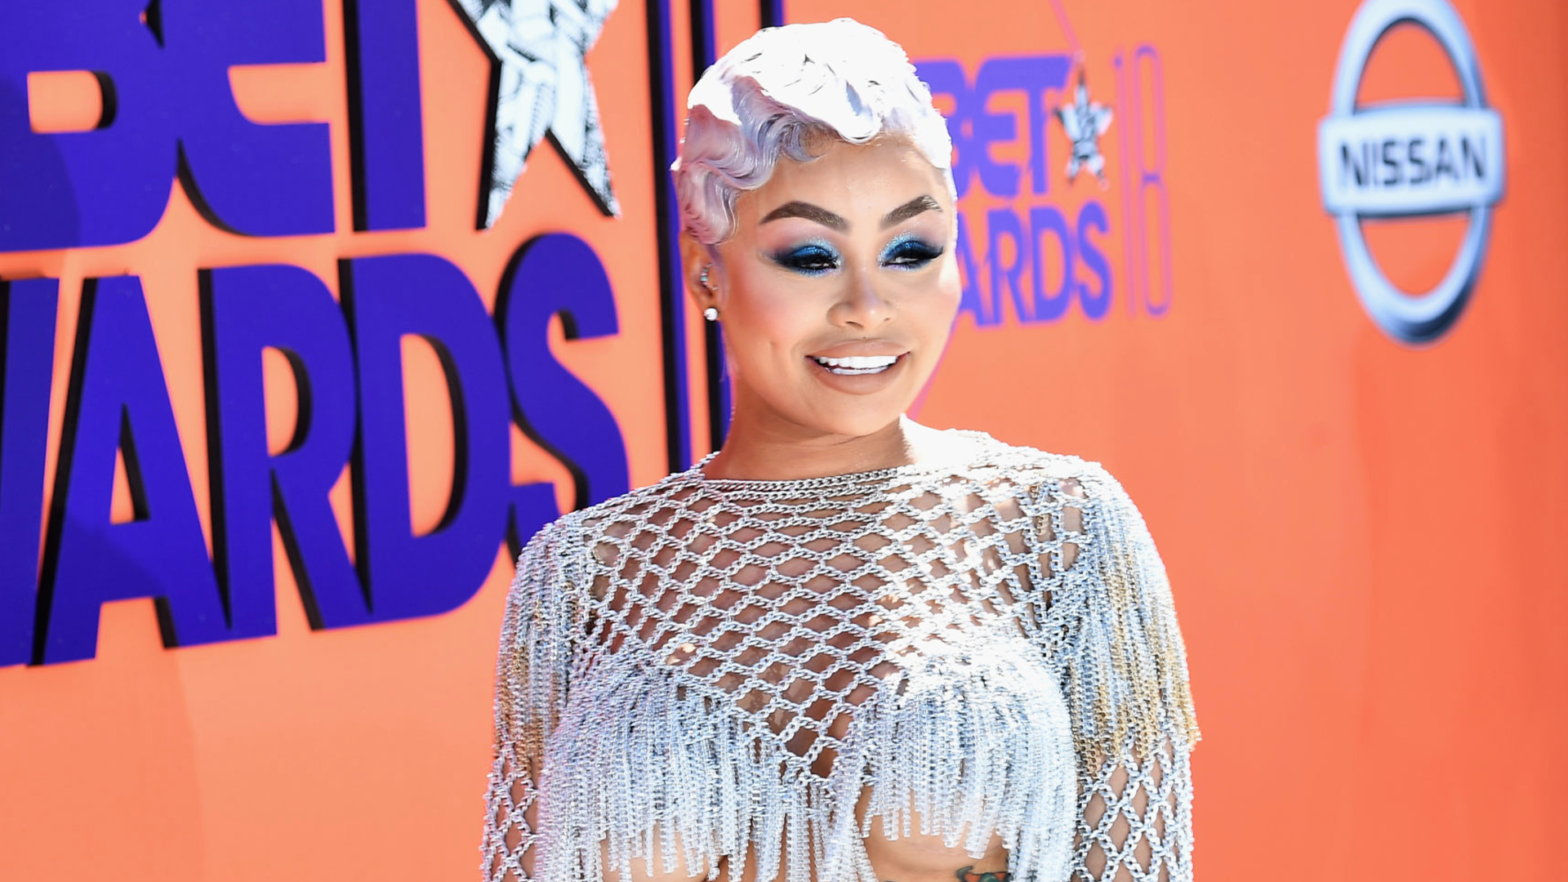 10 Things We Know About Blac Chyna's Various Business ...